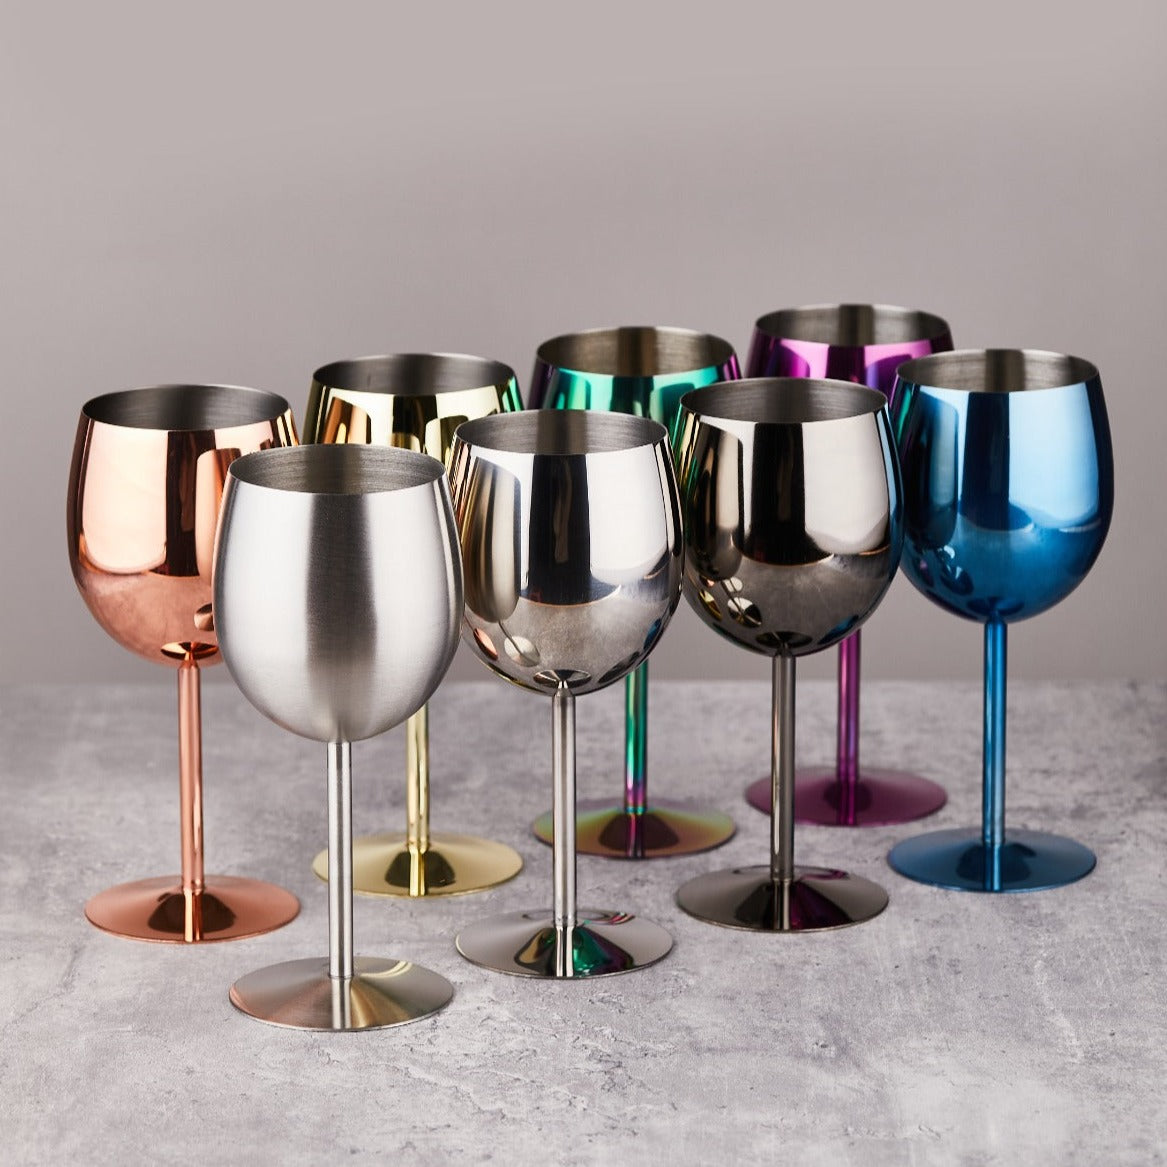 Shop on Stainless Steel Wine Glasses with Afterpay